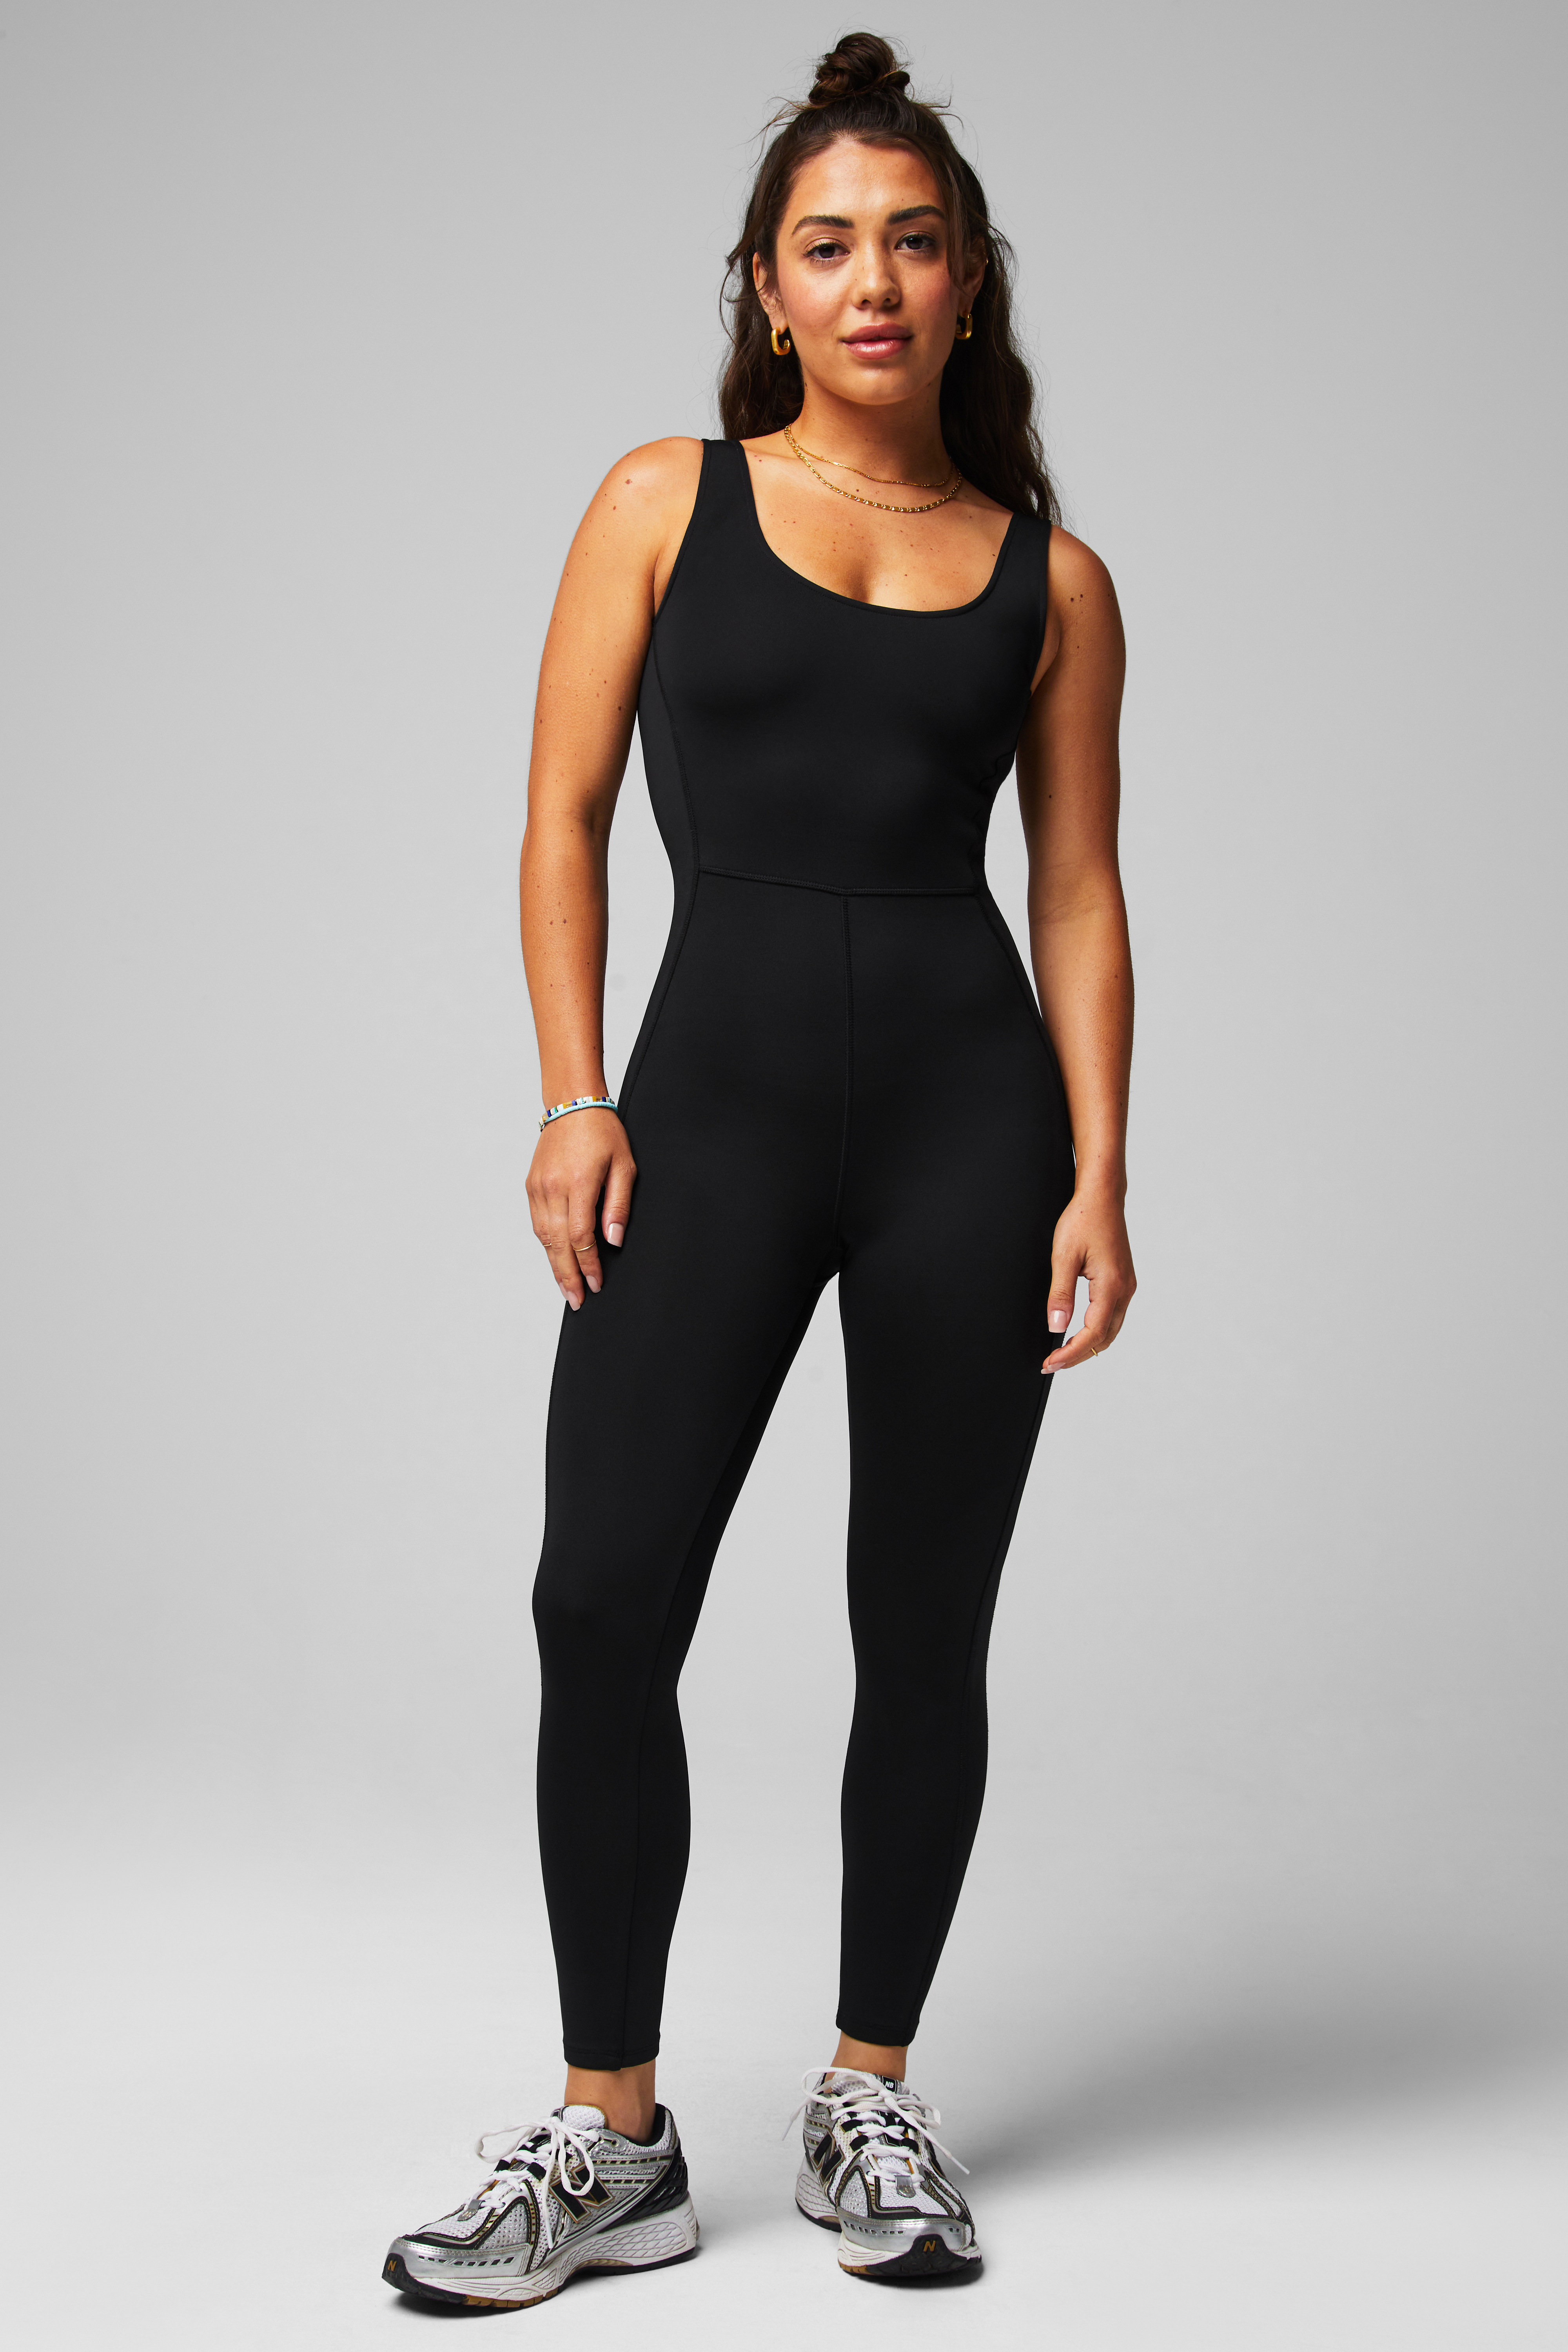 Irish Fitness brand Peachy Lean is giving us fab athletic wear for Autumn 